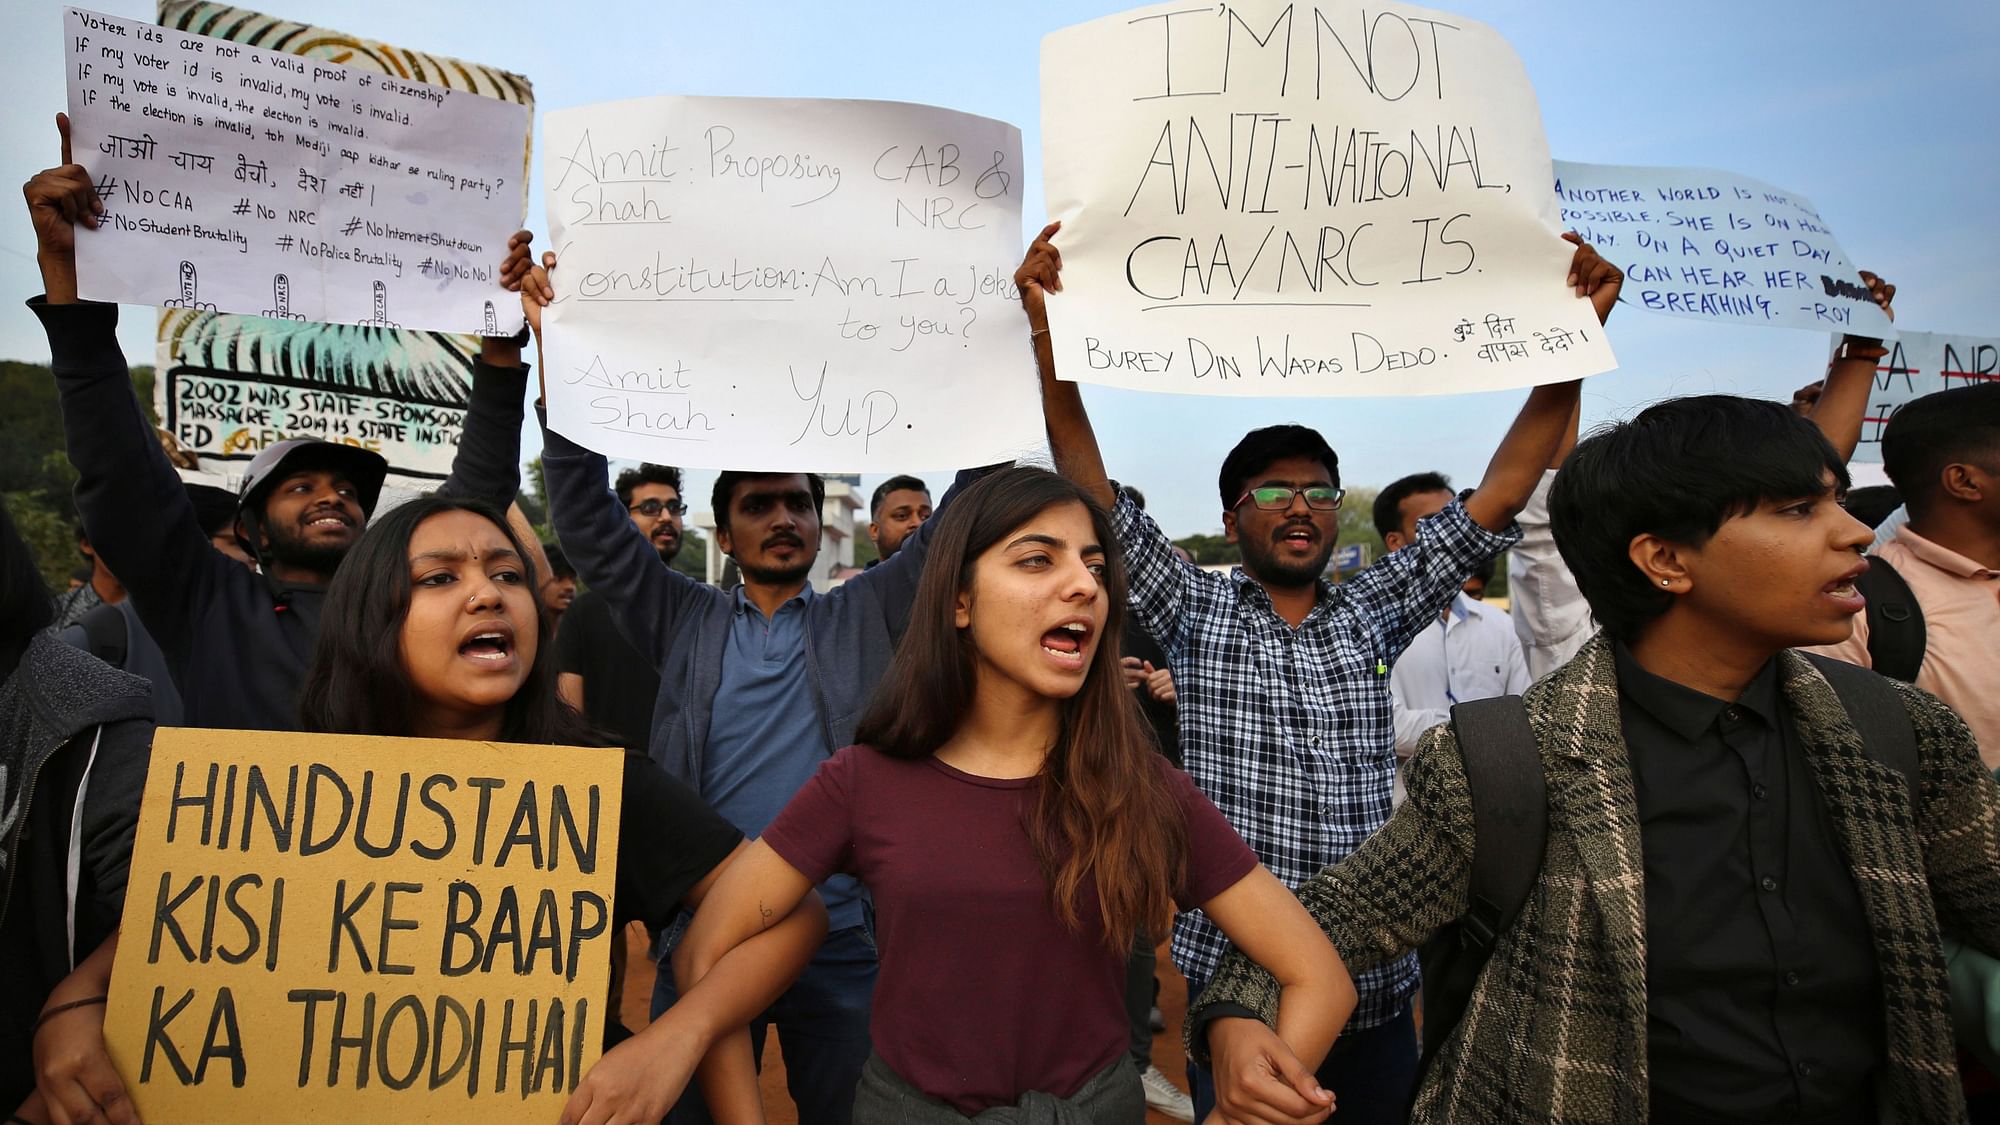 Students shout slogans and hold placards during a protest against the Citizenship Amendment Act in Bengaluru.